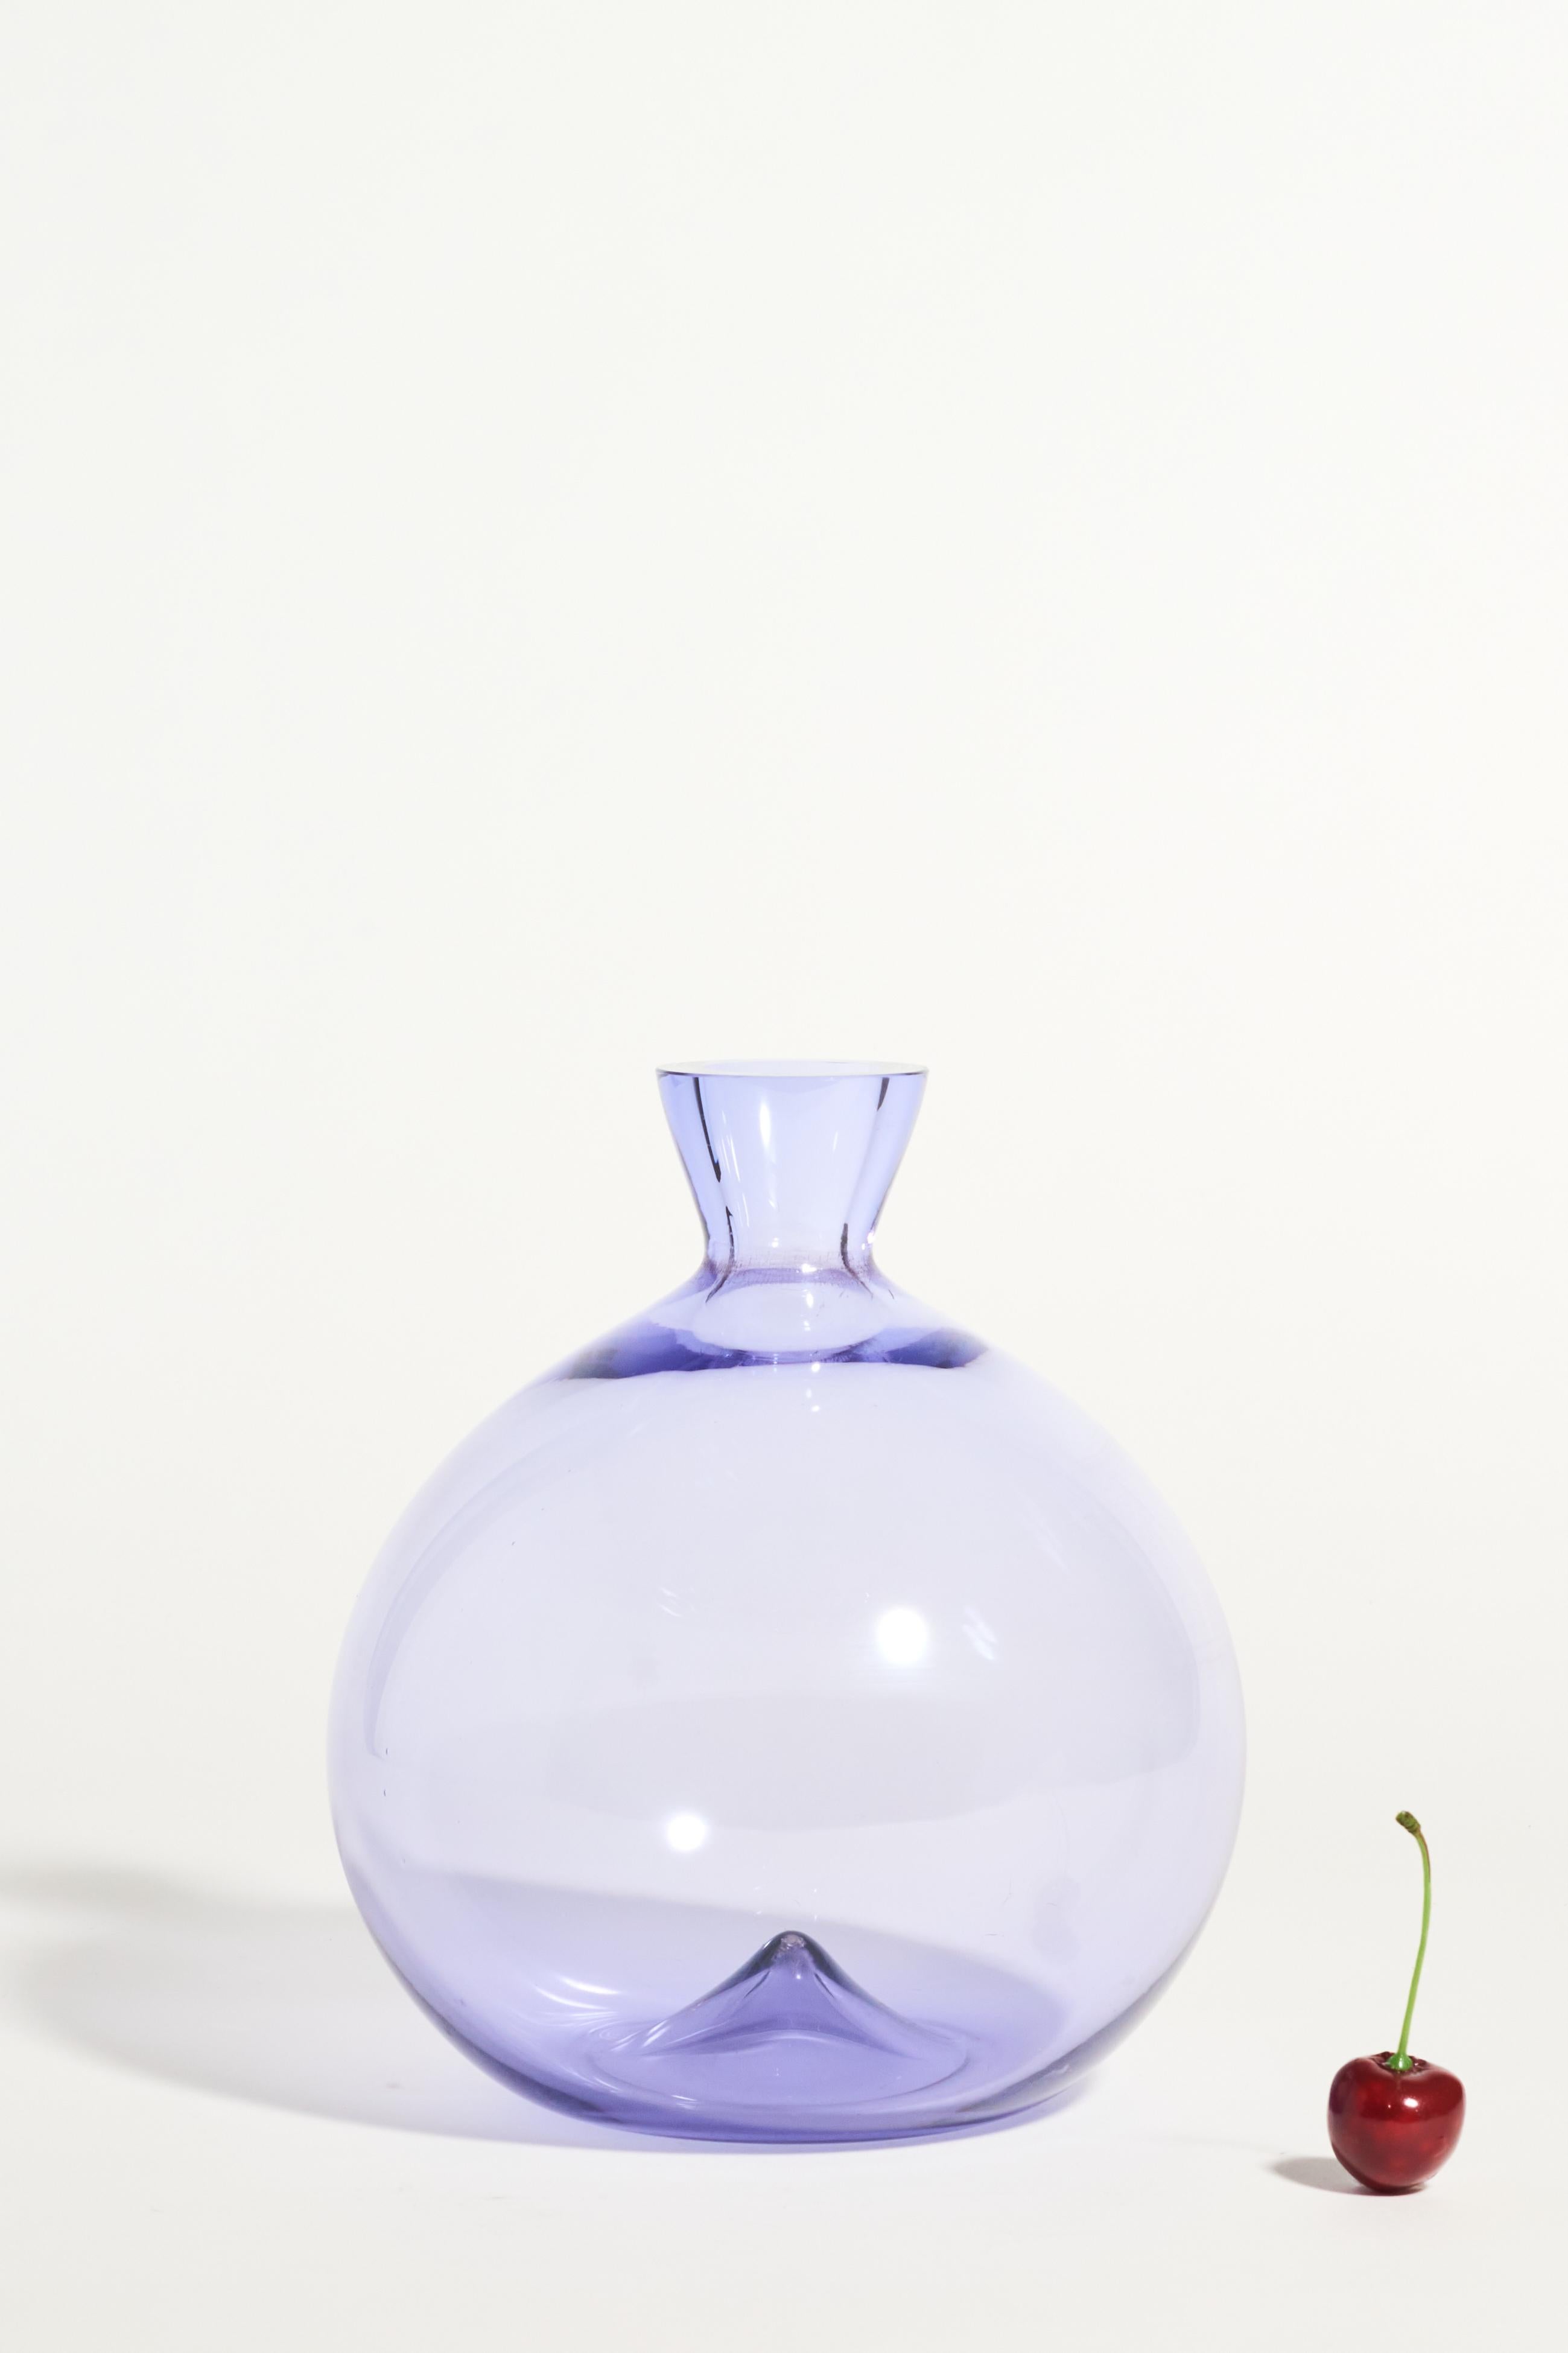 Gorgeous purple Murano glass vase from Italy with a peak and the base.